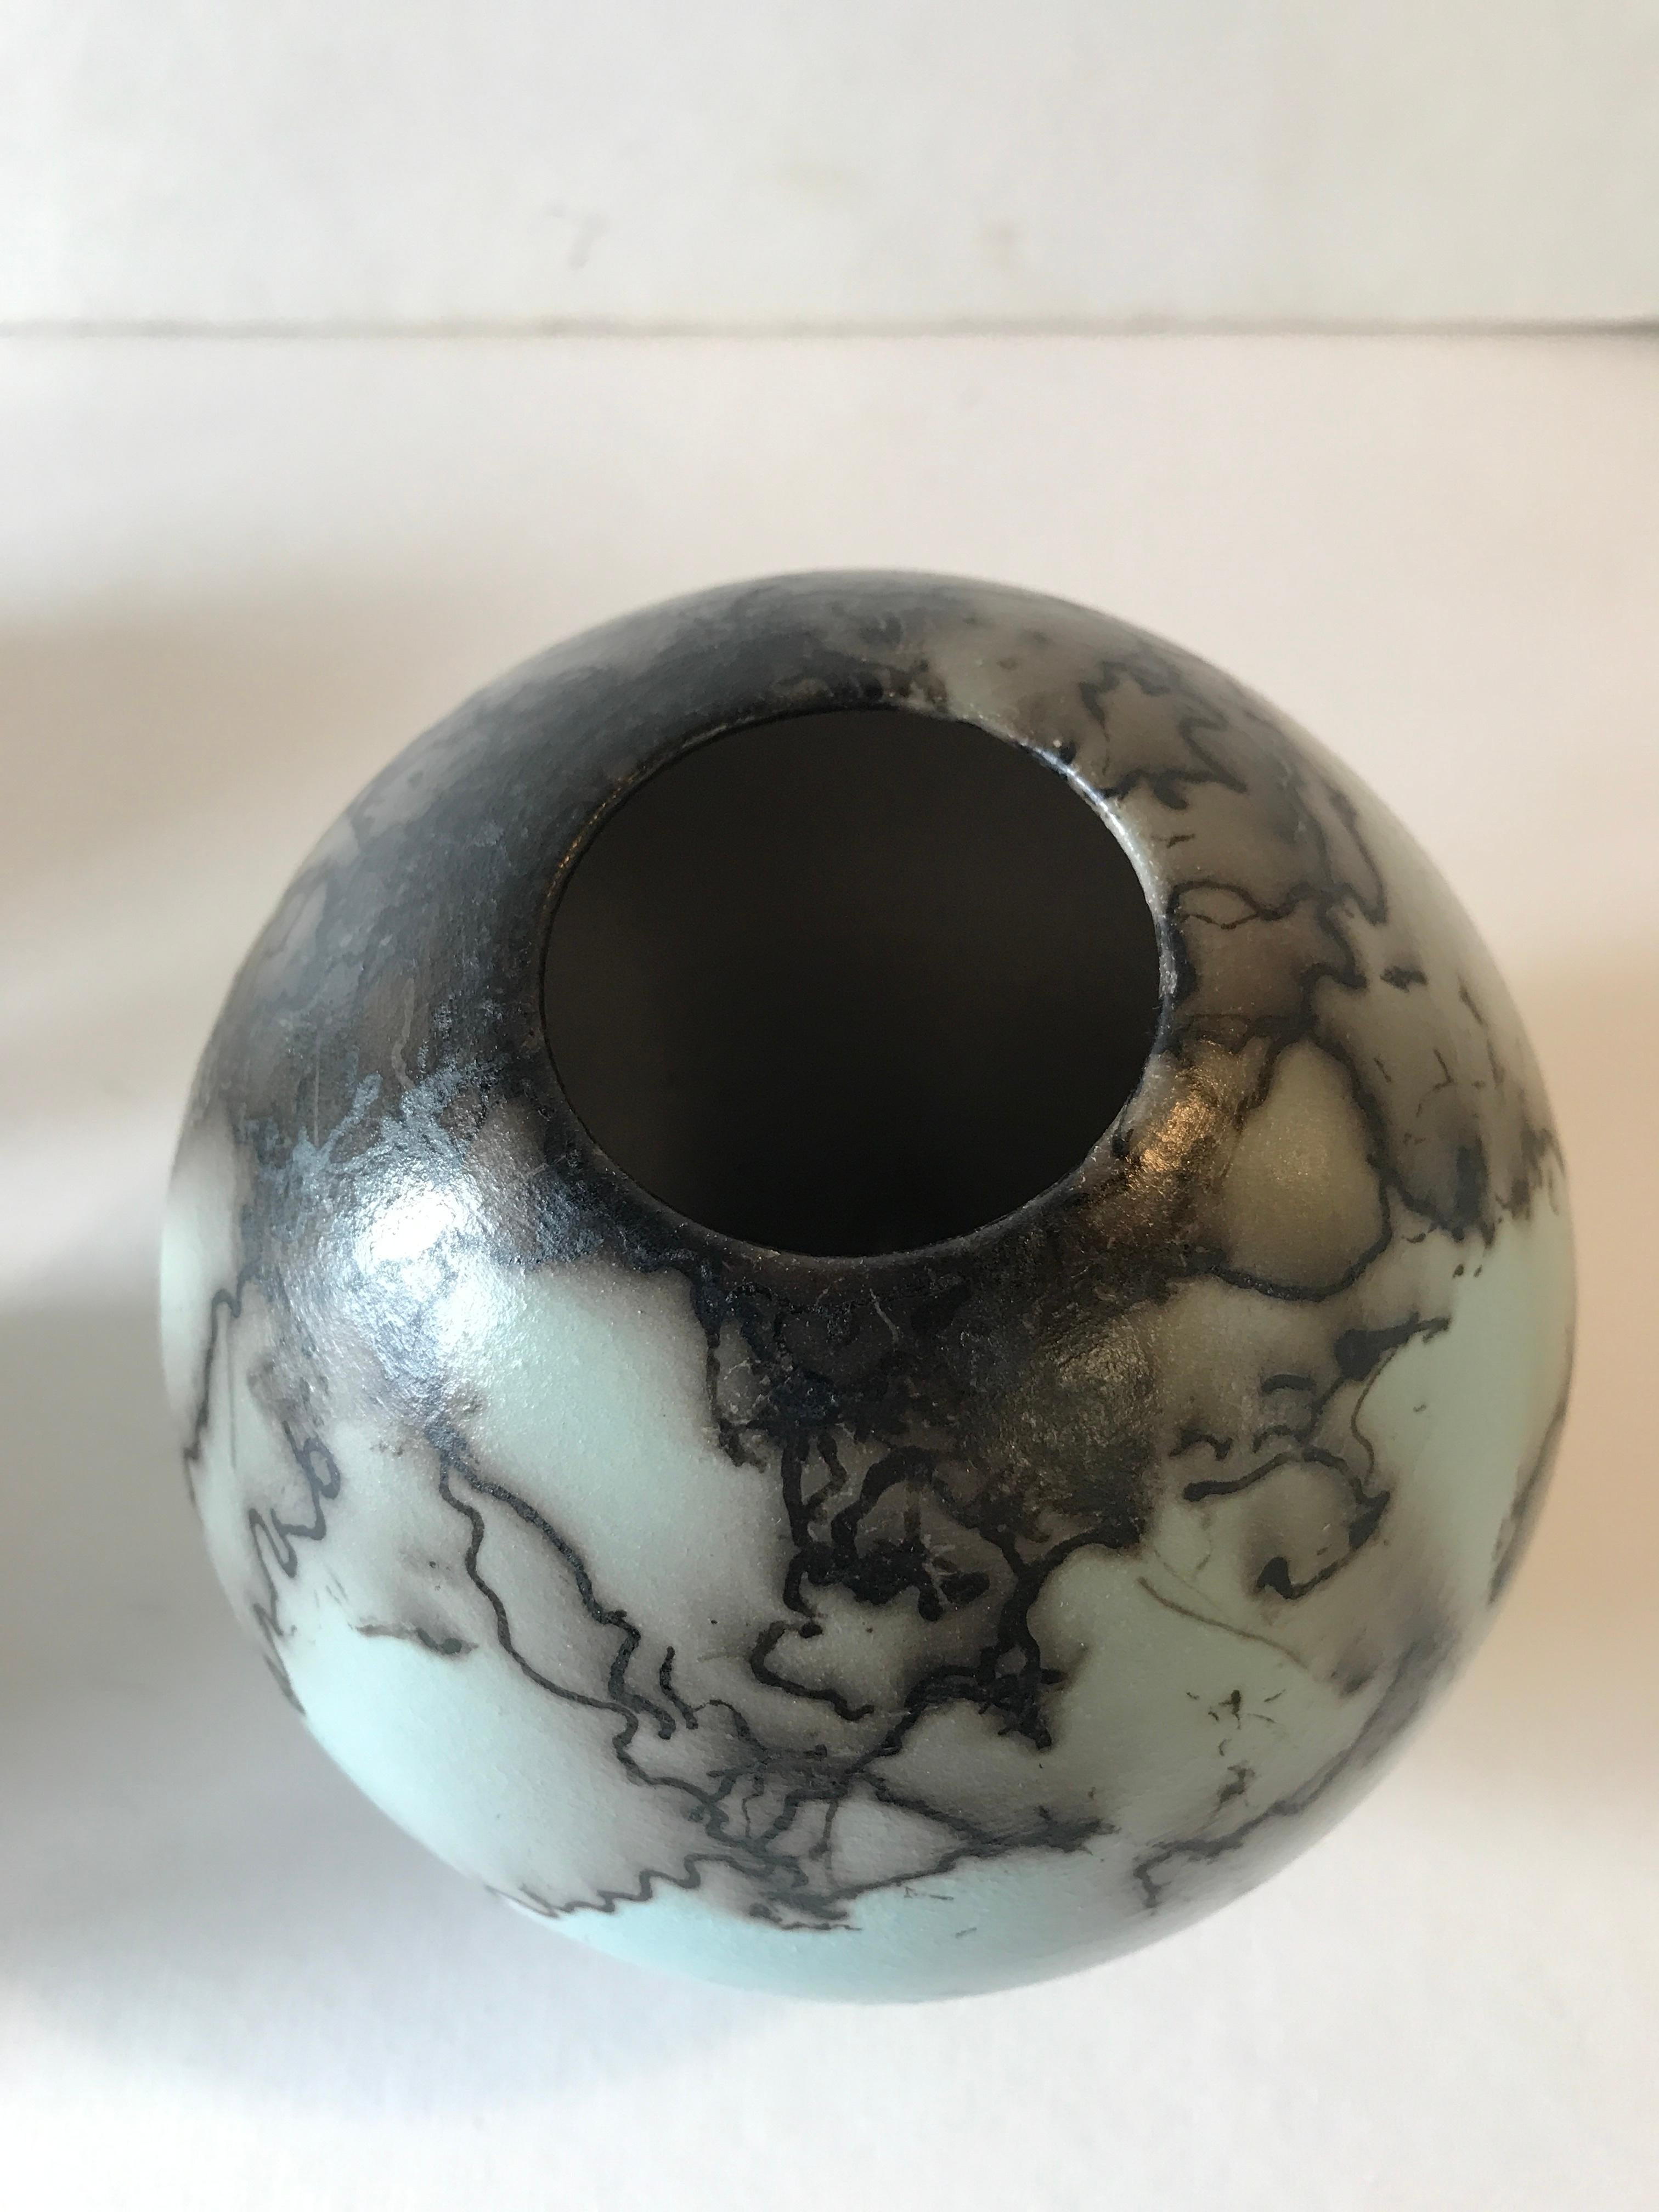 Duck Egg Blue Horse Hair Raku Fired Ball Vase by Tamsin Levene.

ADDITIONAL INFORMATION:
Duck Egg blue horse hair raku fired ball vase by Tamsin Levene
Ceramic on Stone
16 H x 15 W x 15 D cm (7.87 x 5.91 x 5.91 in)

SIZES:
Large: 16 cm x 15